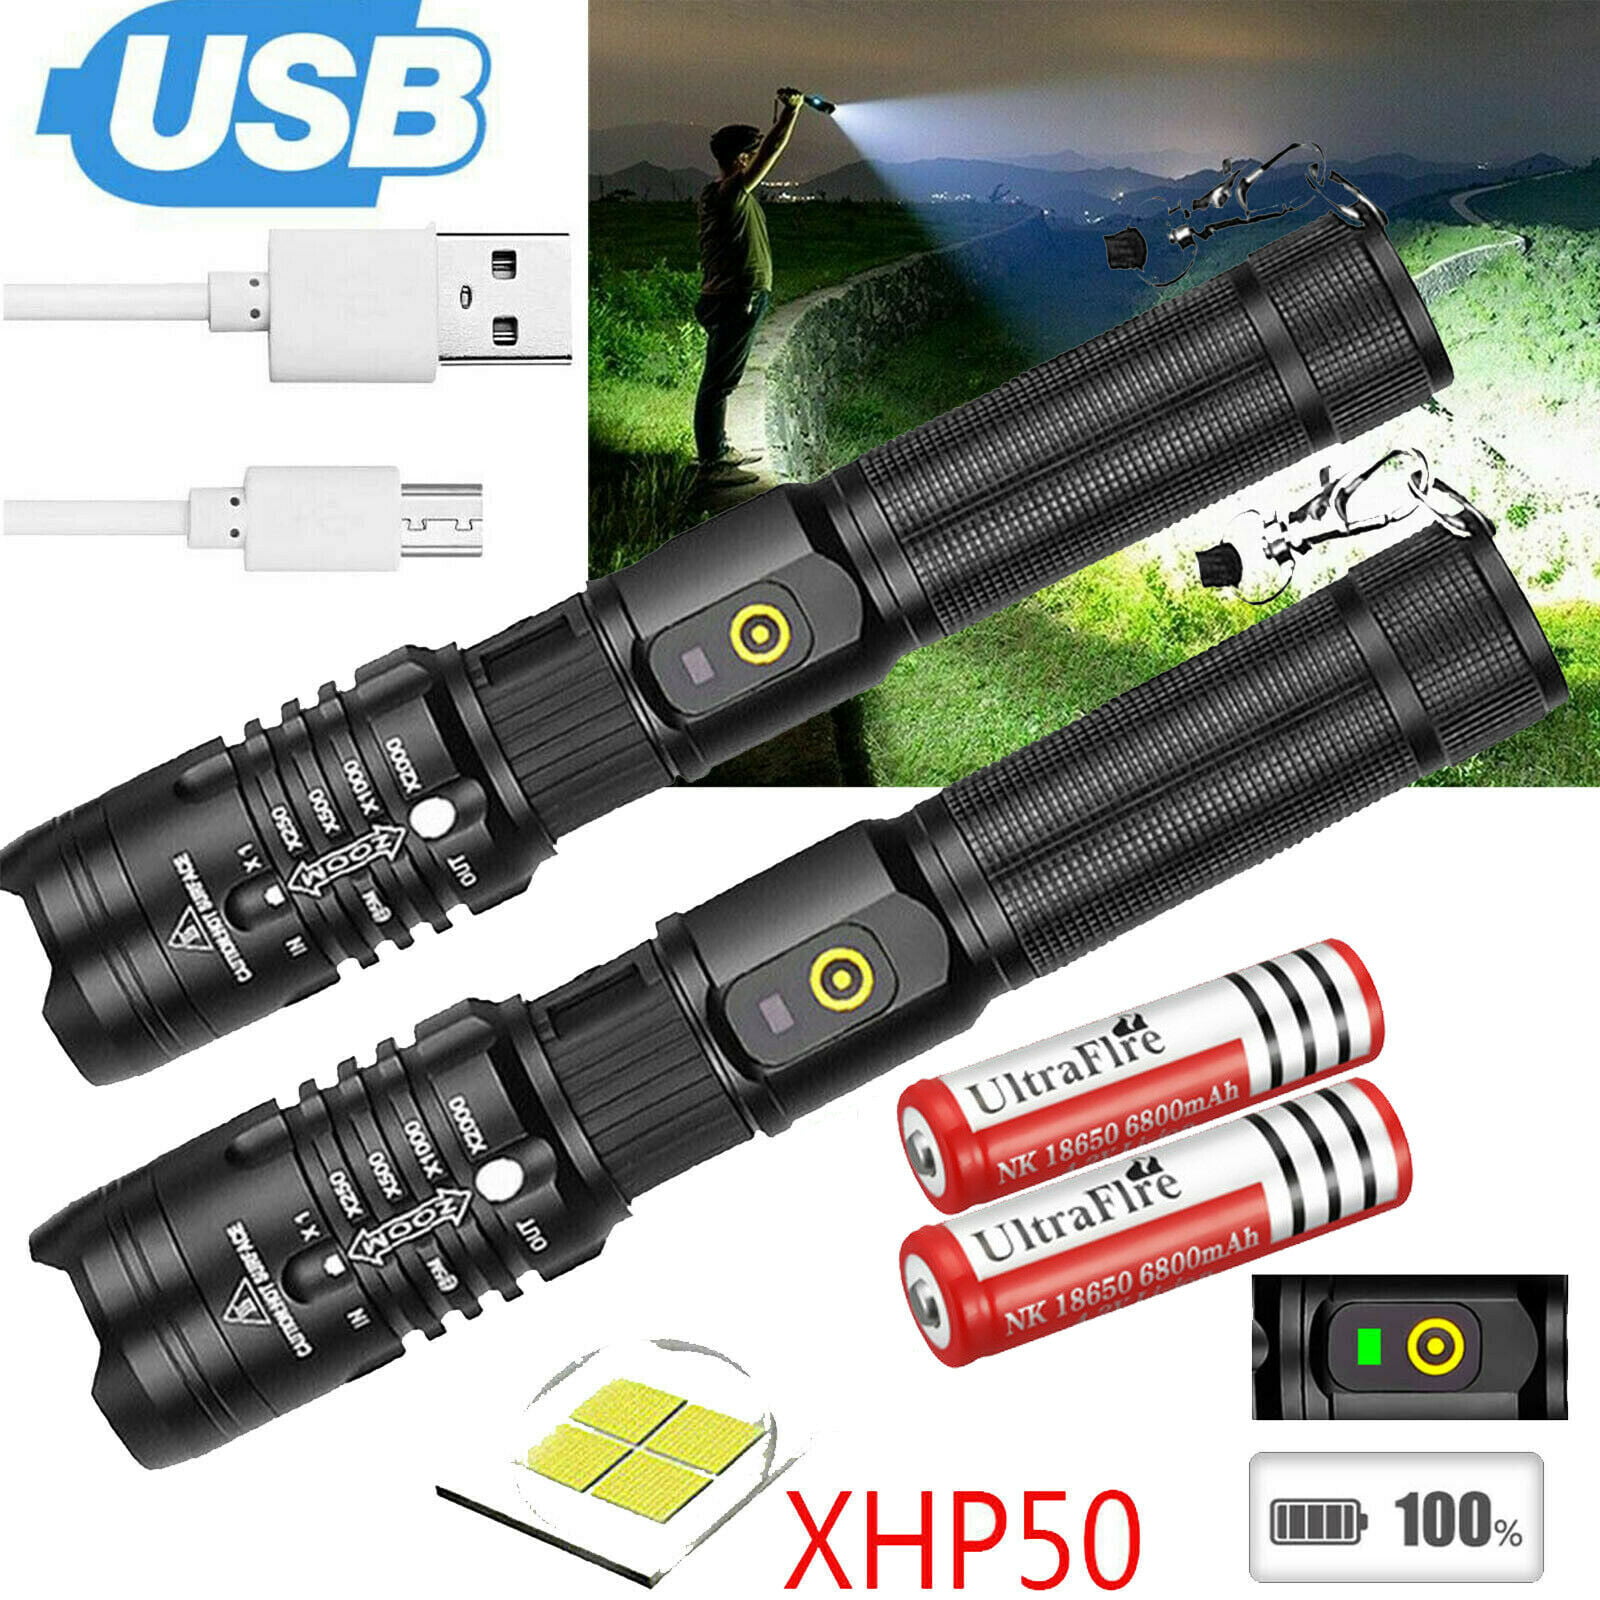 High Powered Torch Ultra Bright 990000LM LED Flashlight Tactical Hiking Lamp T6 